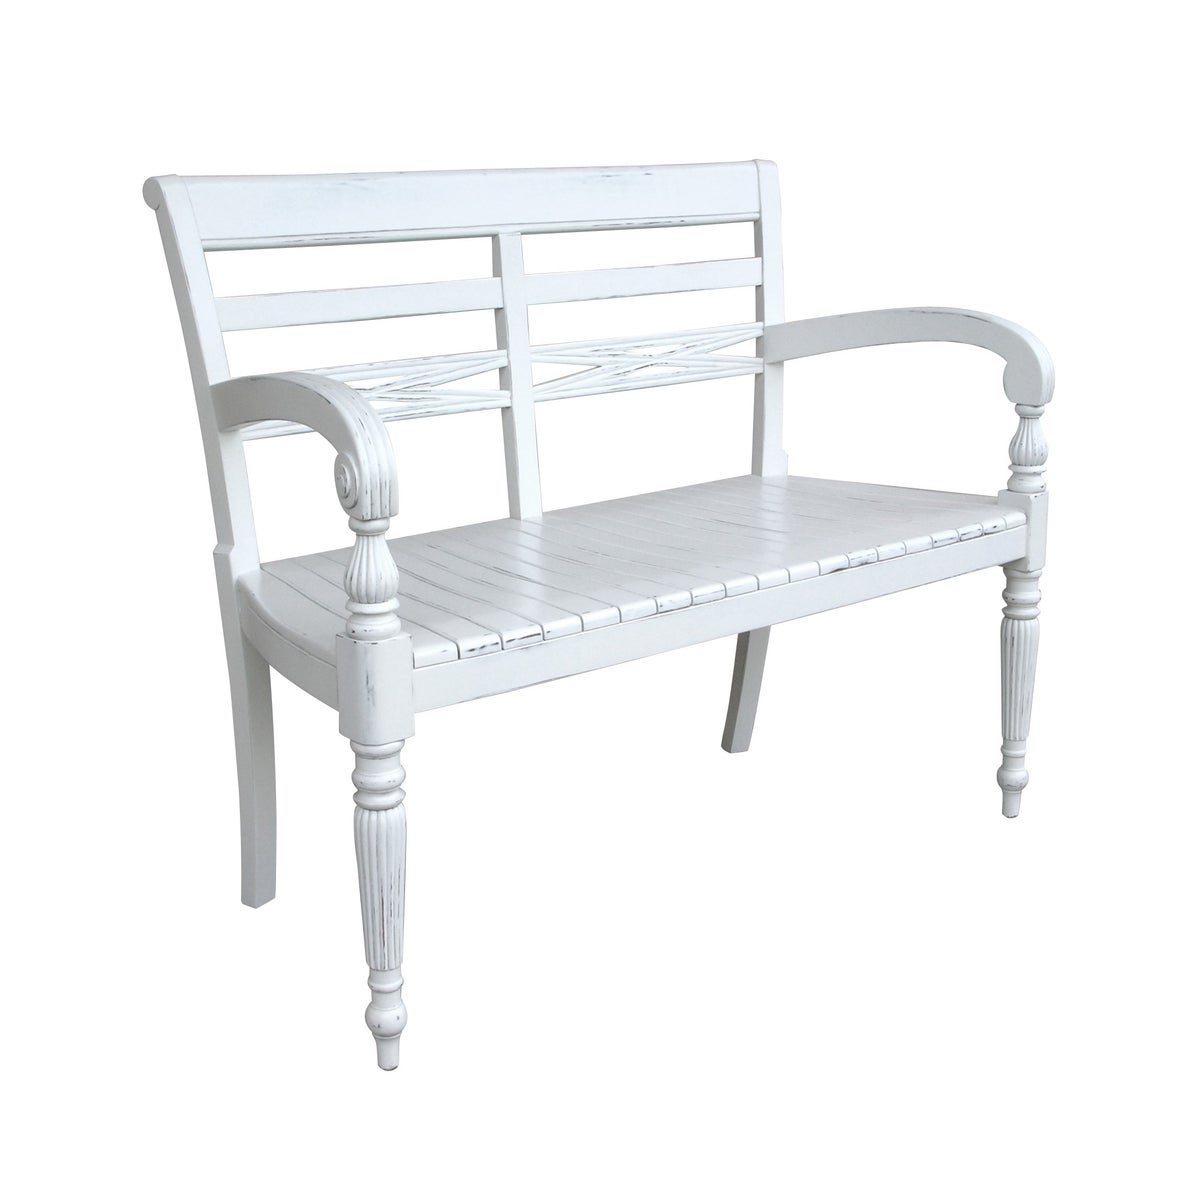 & RAFFLES TRADEWINDS - Furniture WHT accessories BENCH accents - |